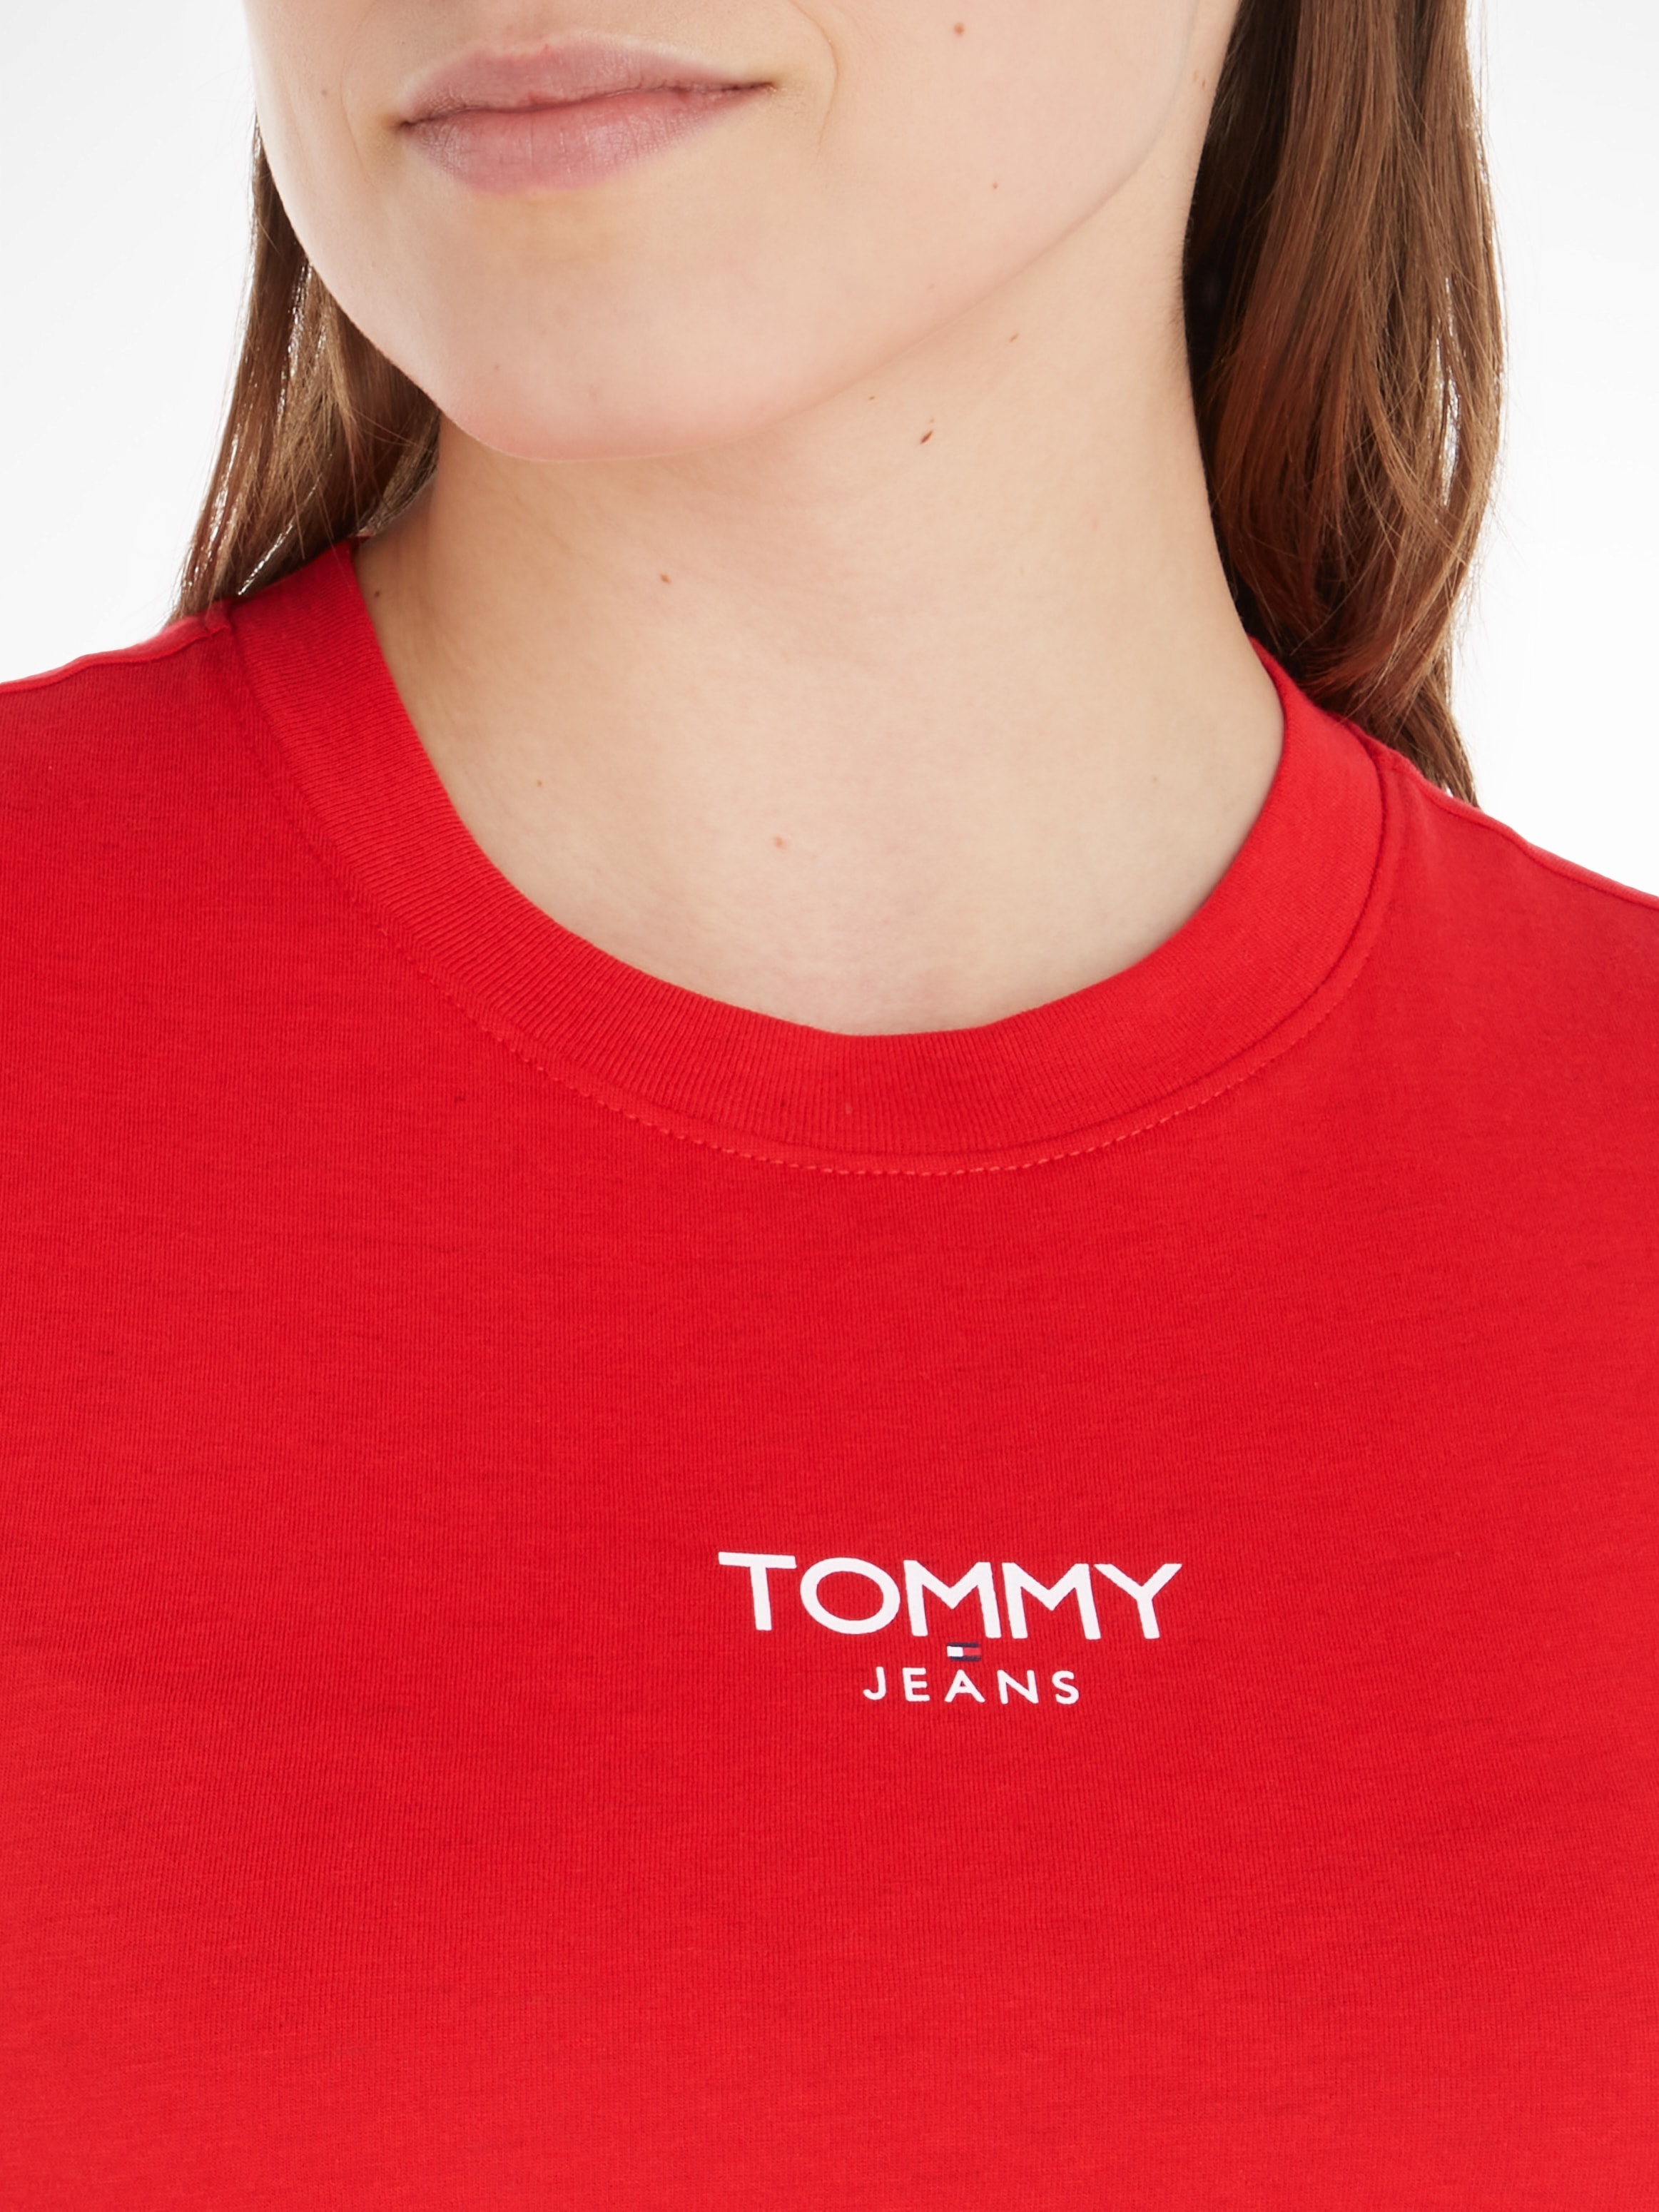 | T-Shirt Tommy »TJW SS«, mit Logo Tommy LOGO I\'m ESSENTIAL Jeans Jeans walking online BBY 1